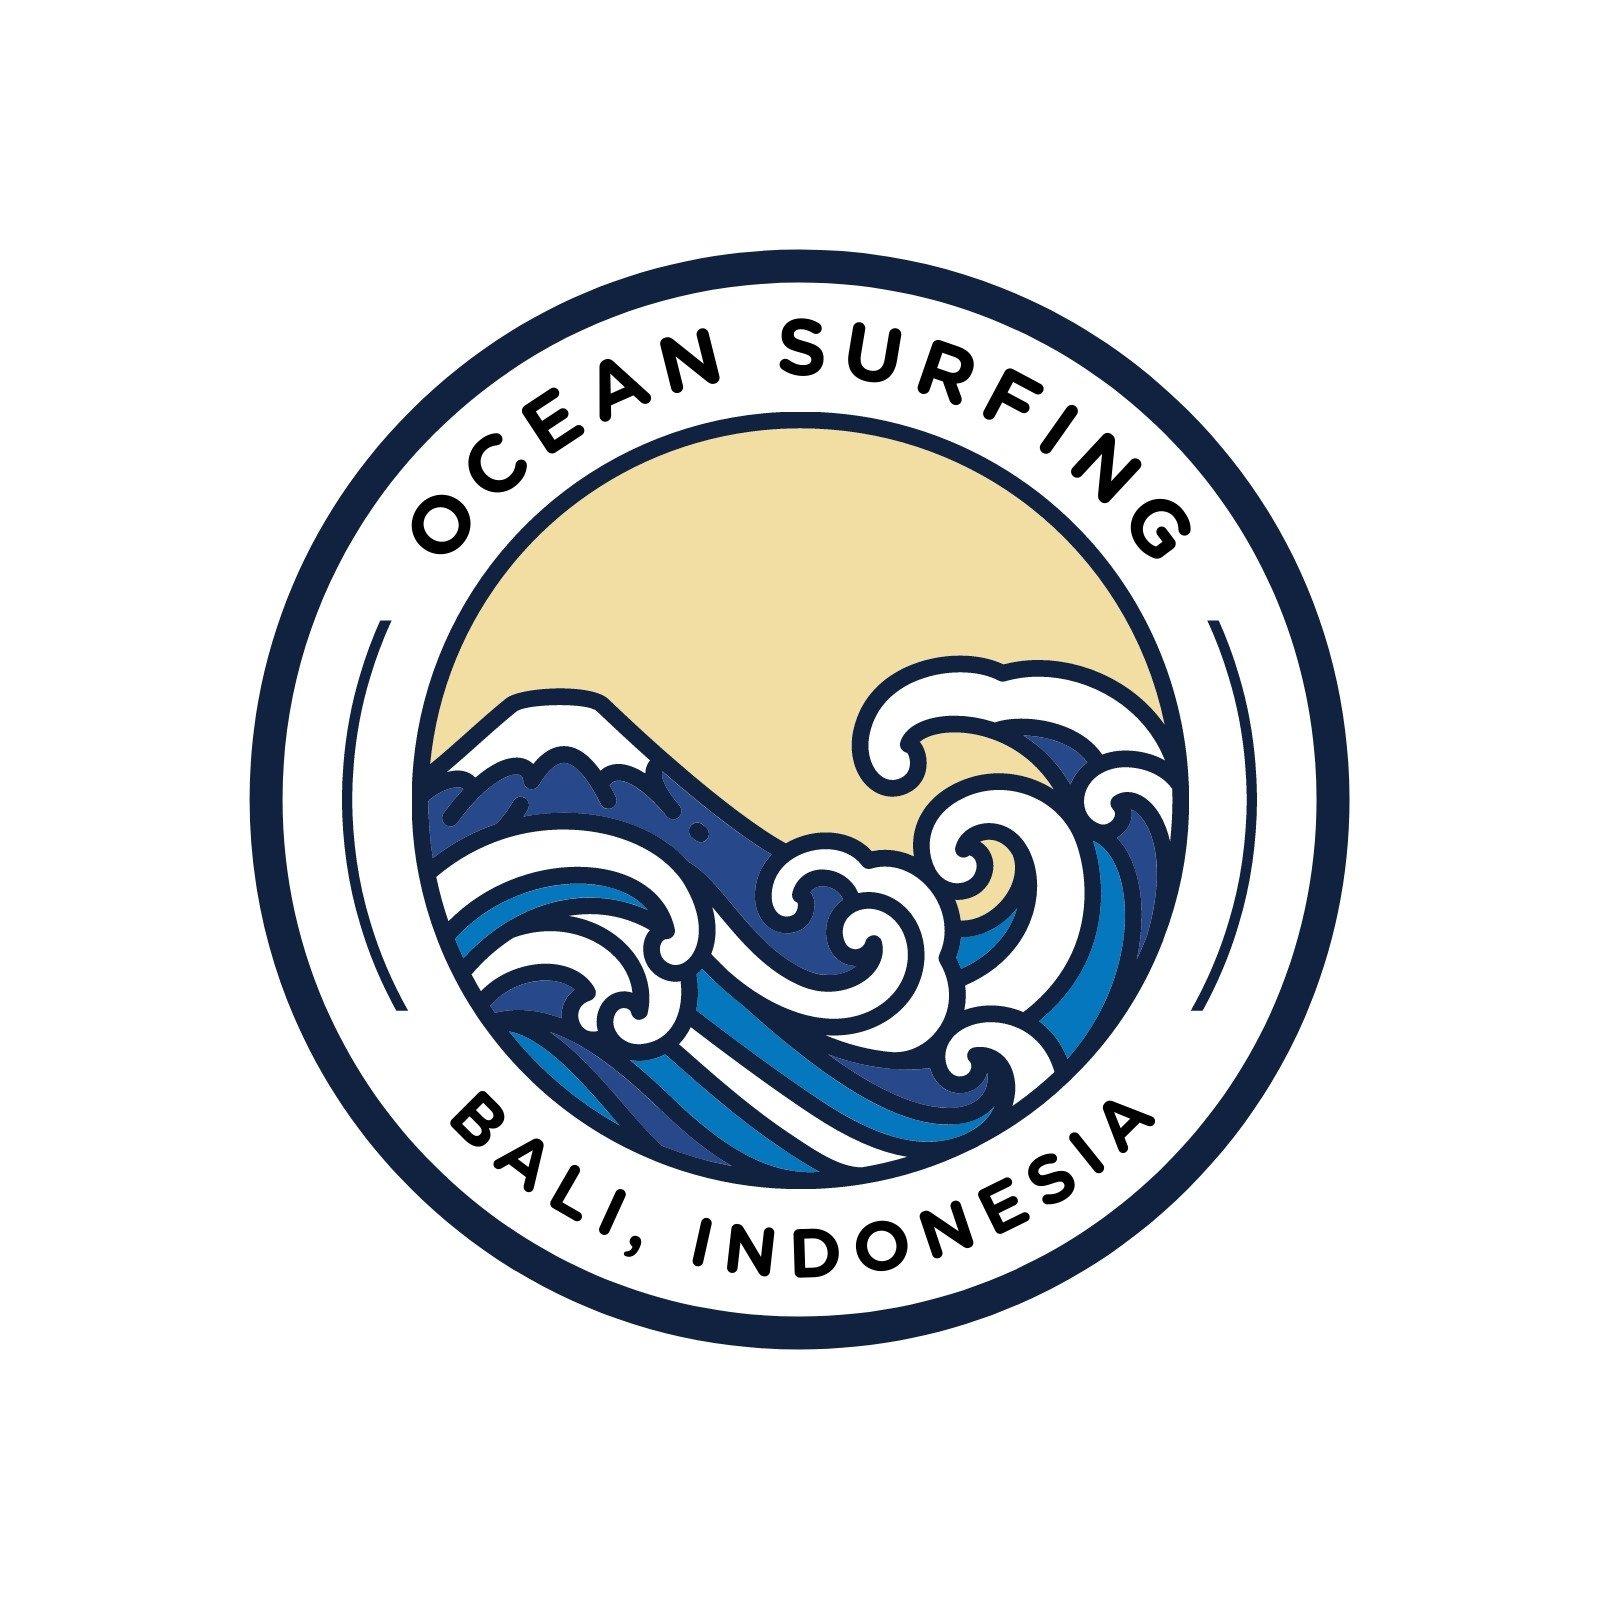 Blue and White Circle Surfing Club Logo